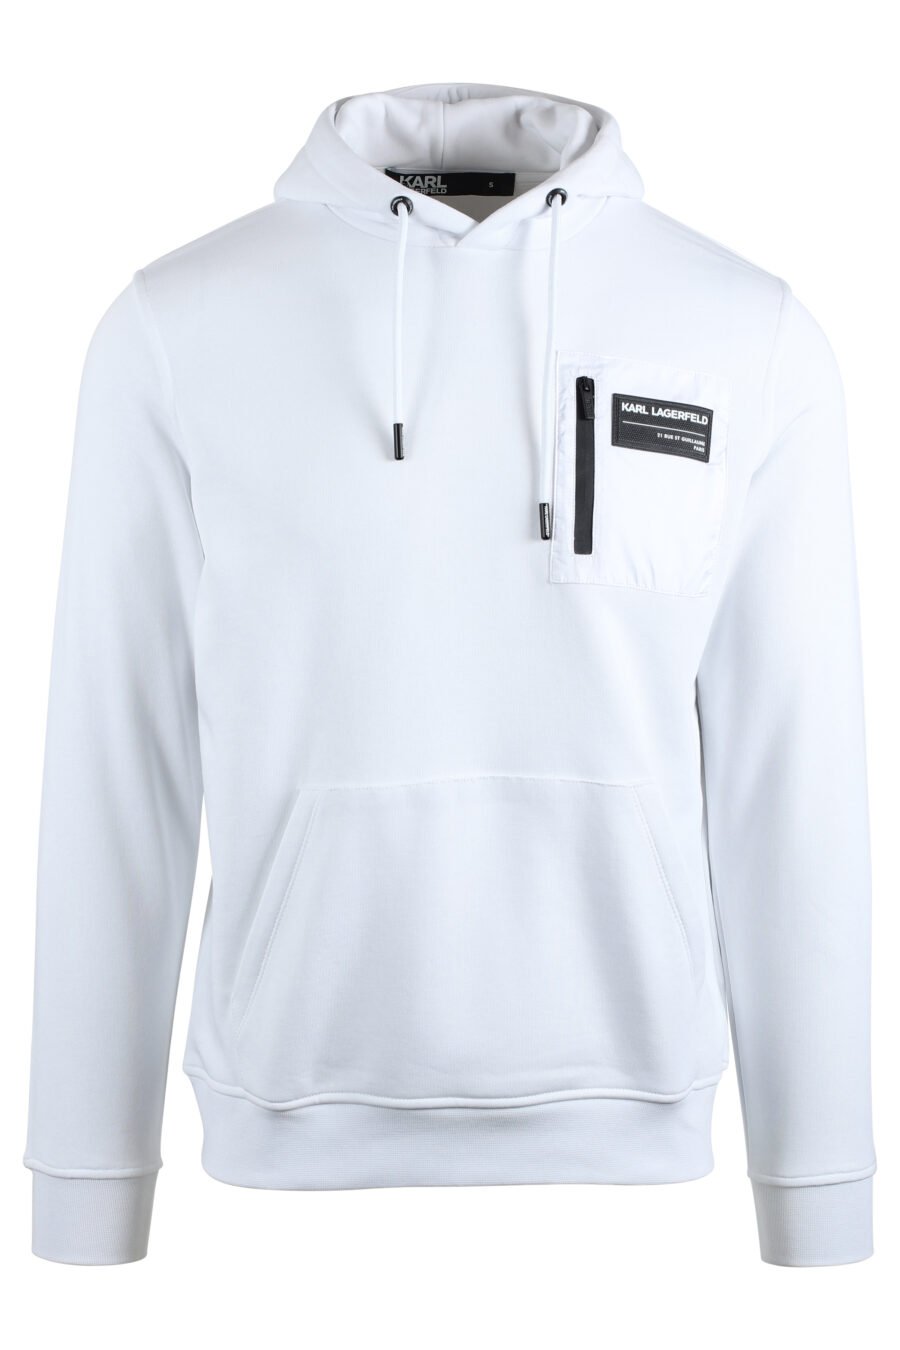 White hooded sweatshirt with white logo patch - IMG 4775